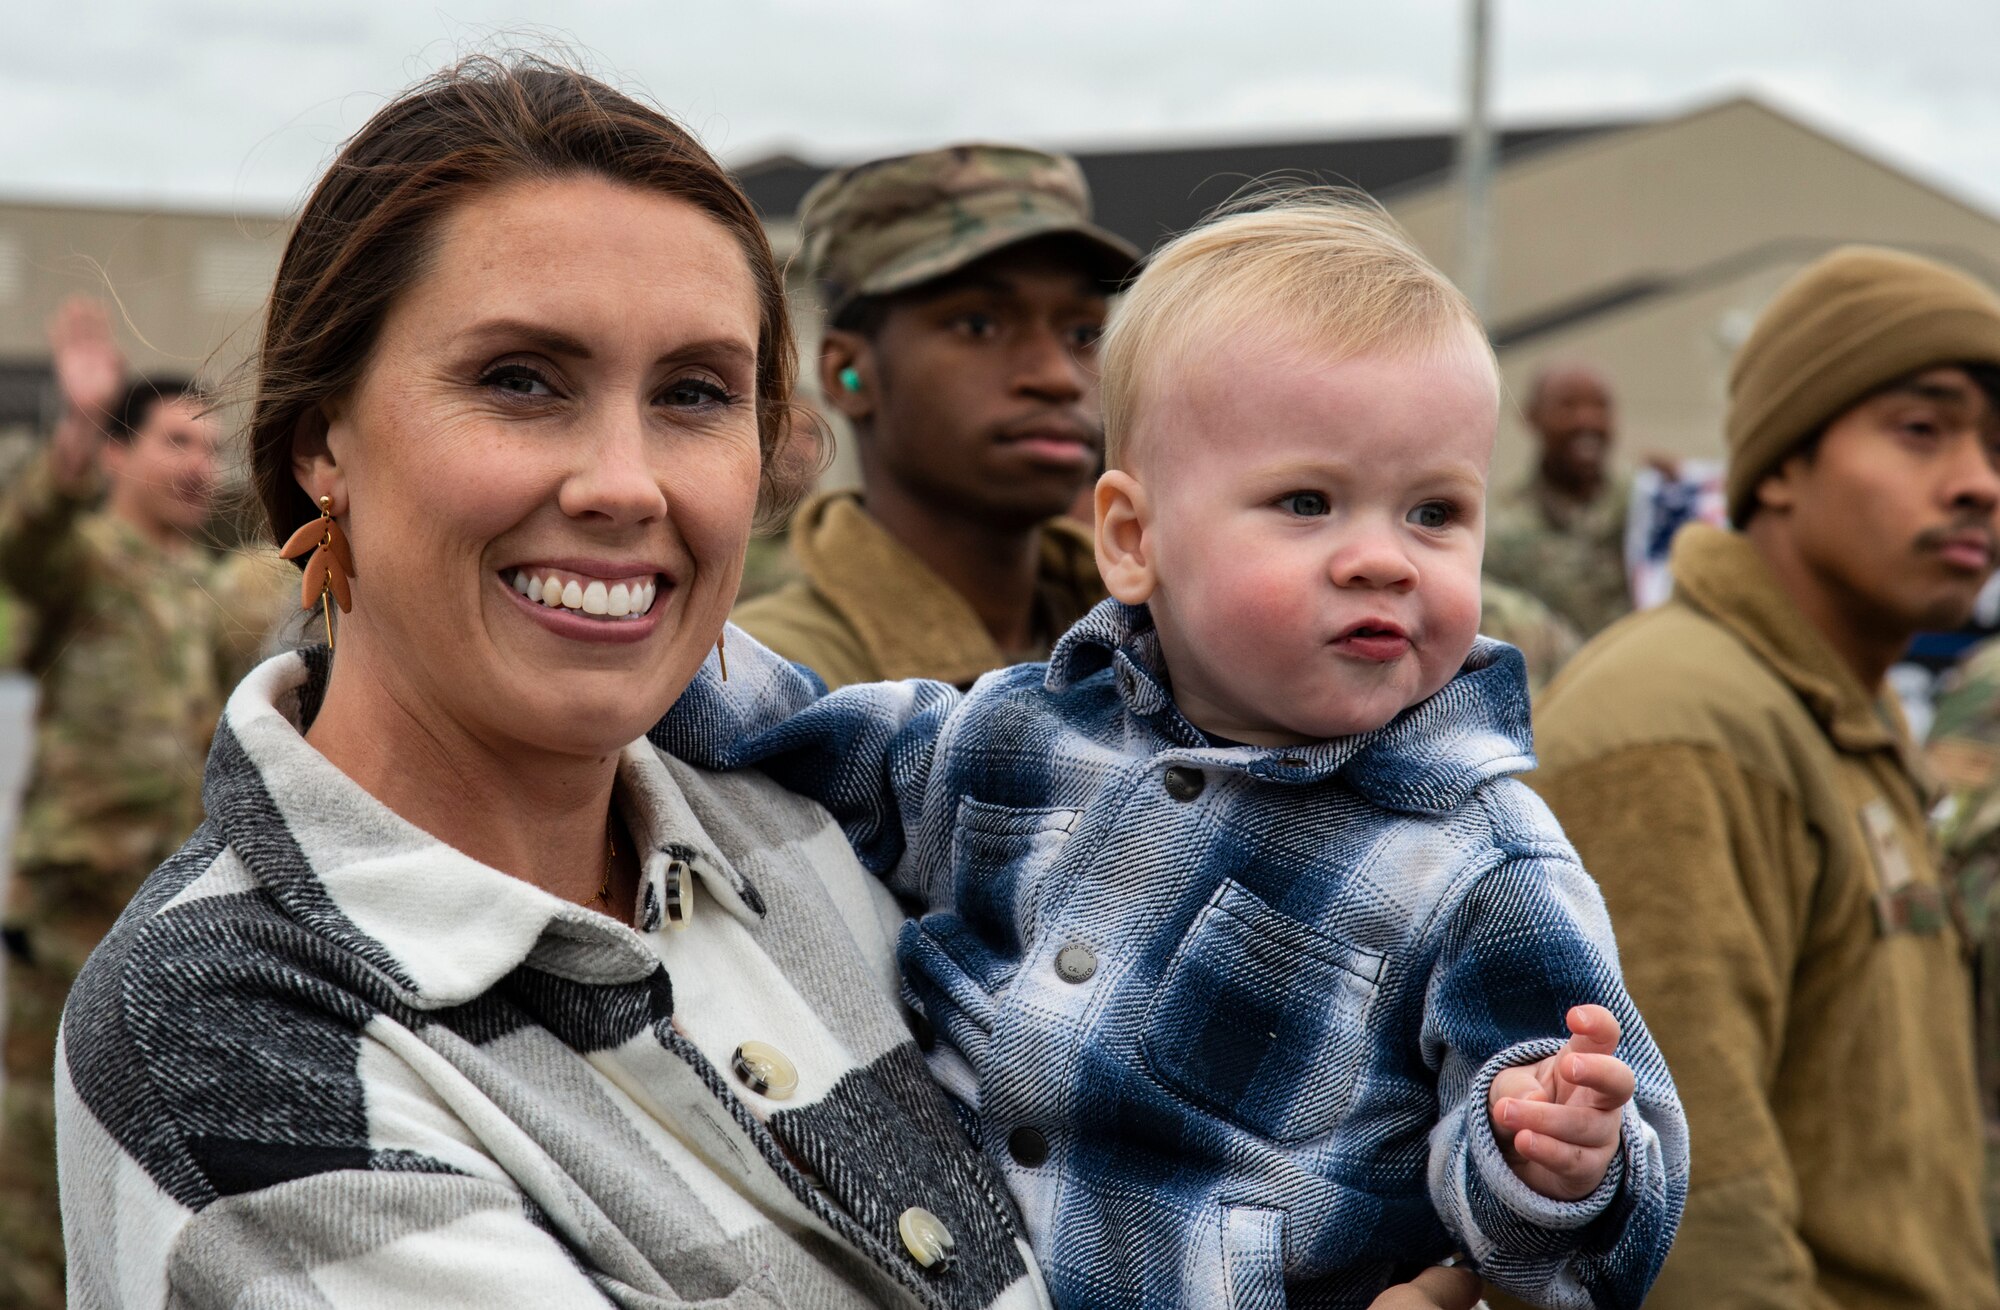 Amanda and Beau Bertelson, wife and son of Capt. Ben Bertelson, 3rd Airlift Squadron C-17 Globemaster III pilot, wait for him to deplane at Dover Air Force Base, Delaware, Oct. 3, 2022. Members from the 3rd AS, 436th Mission Generation Group and 436th Security Forces Squadron were greeted by family, fellow squadron and Team Dover members after a deployment to Al Udeid Air Base, Qatar. (U.S. Air Force photo by Roland Balik)